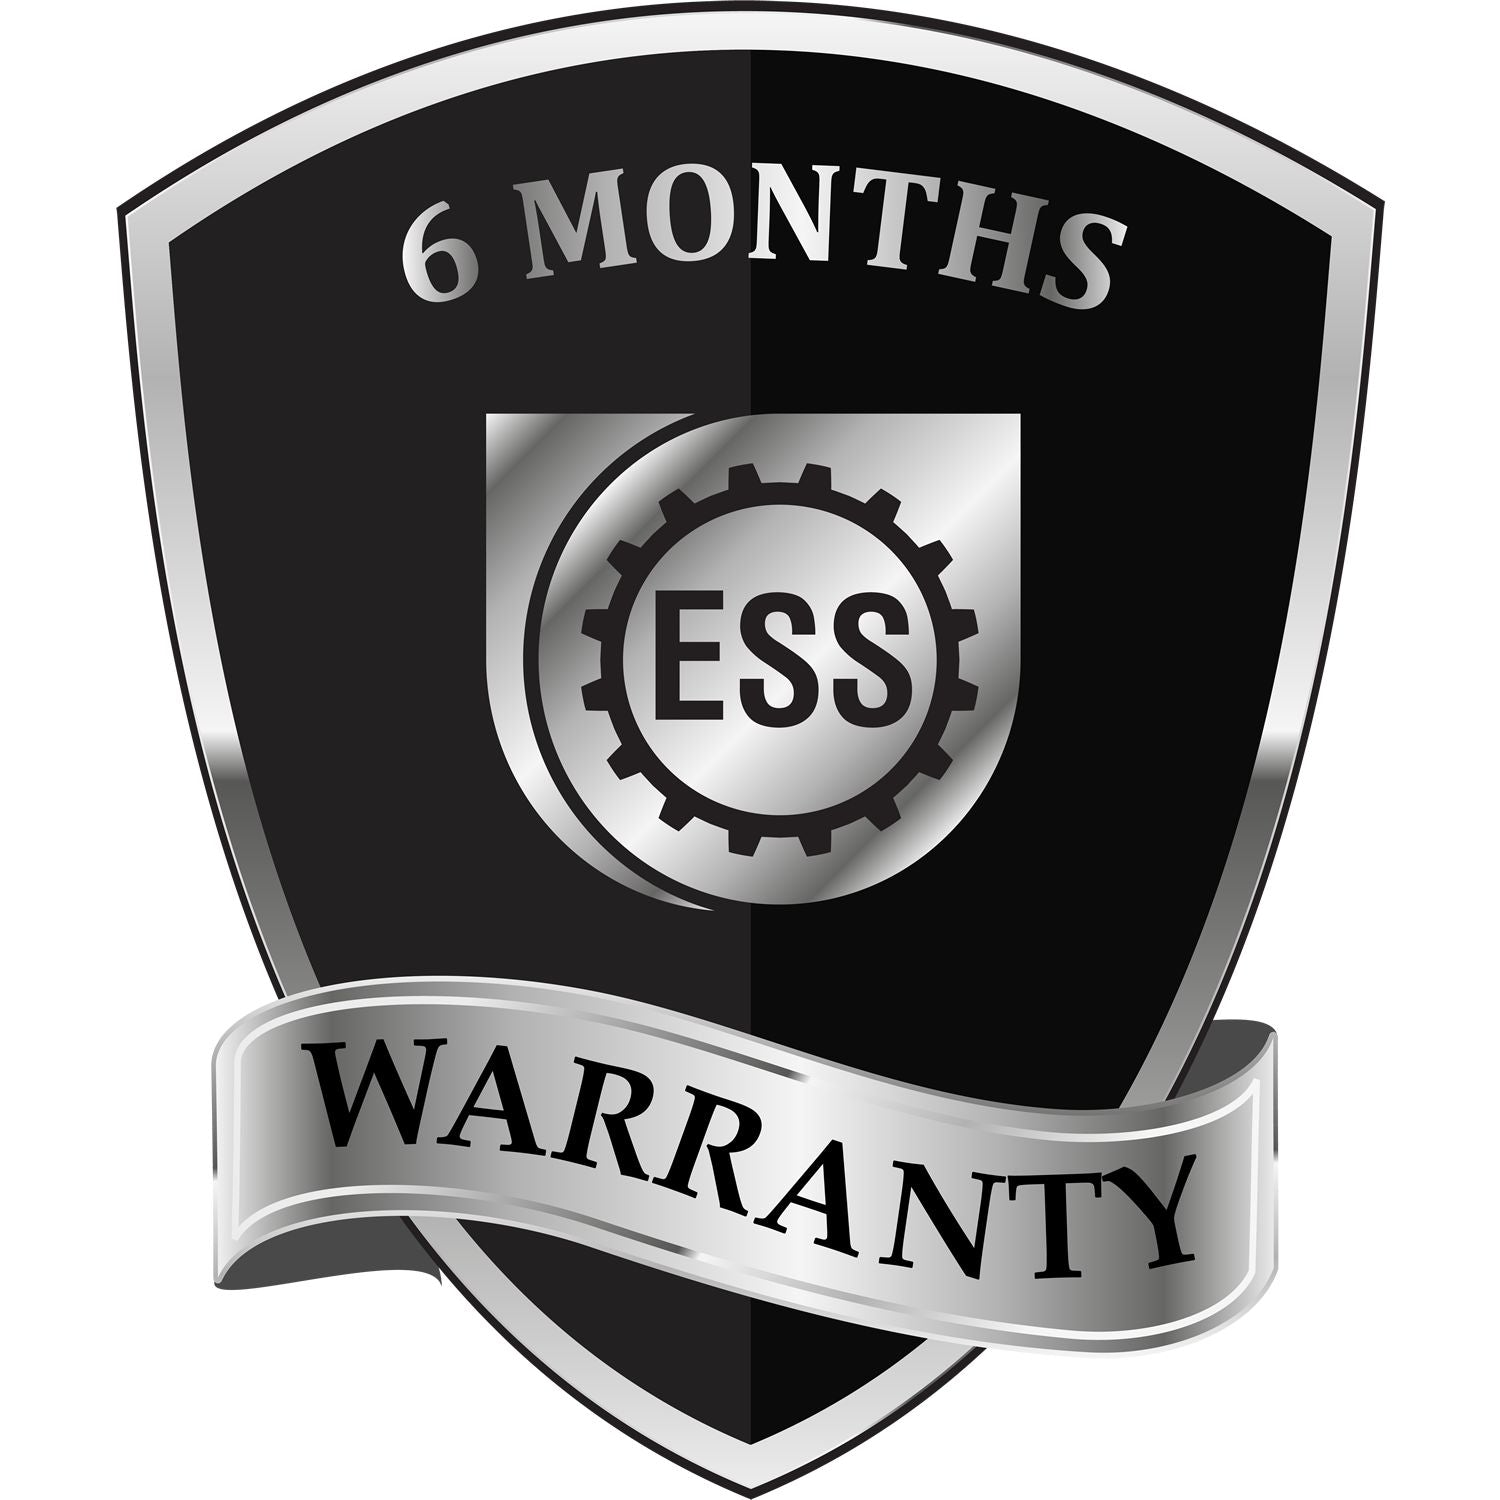 A badge or emblem showing a warranty icon for the Self-Inking Iowa PE Stamp